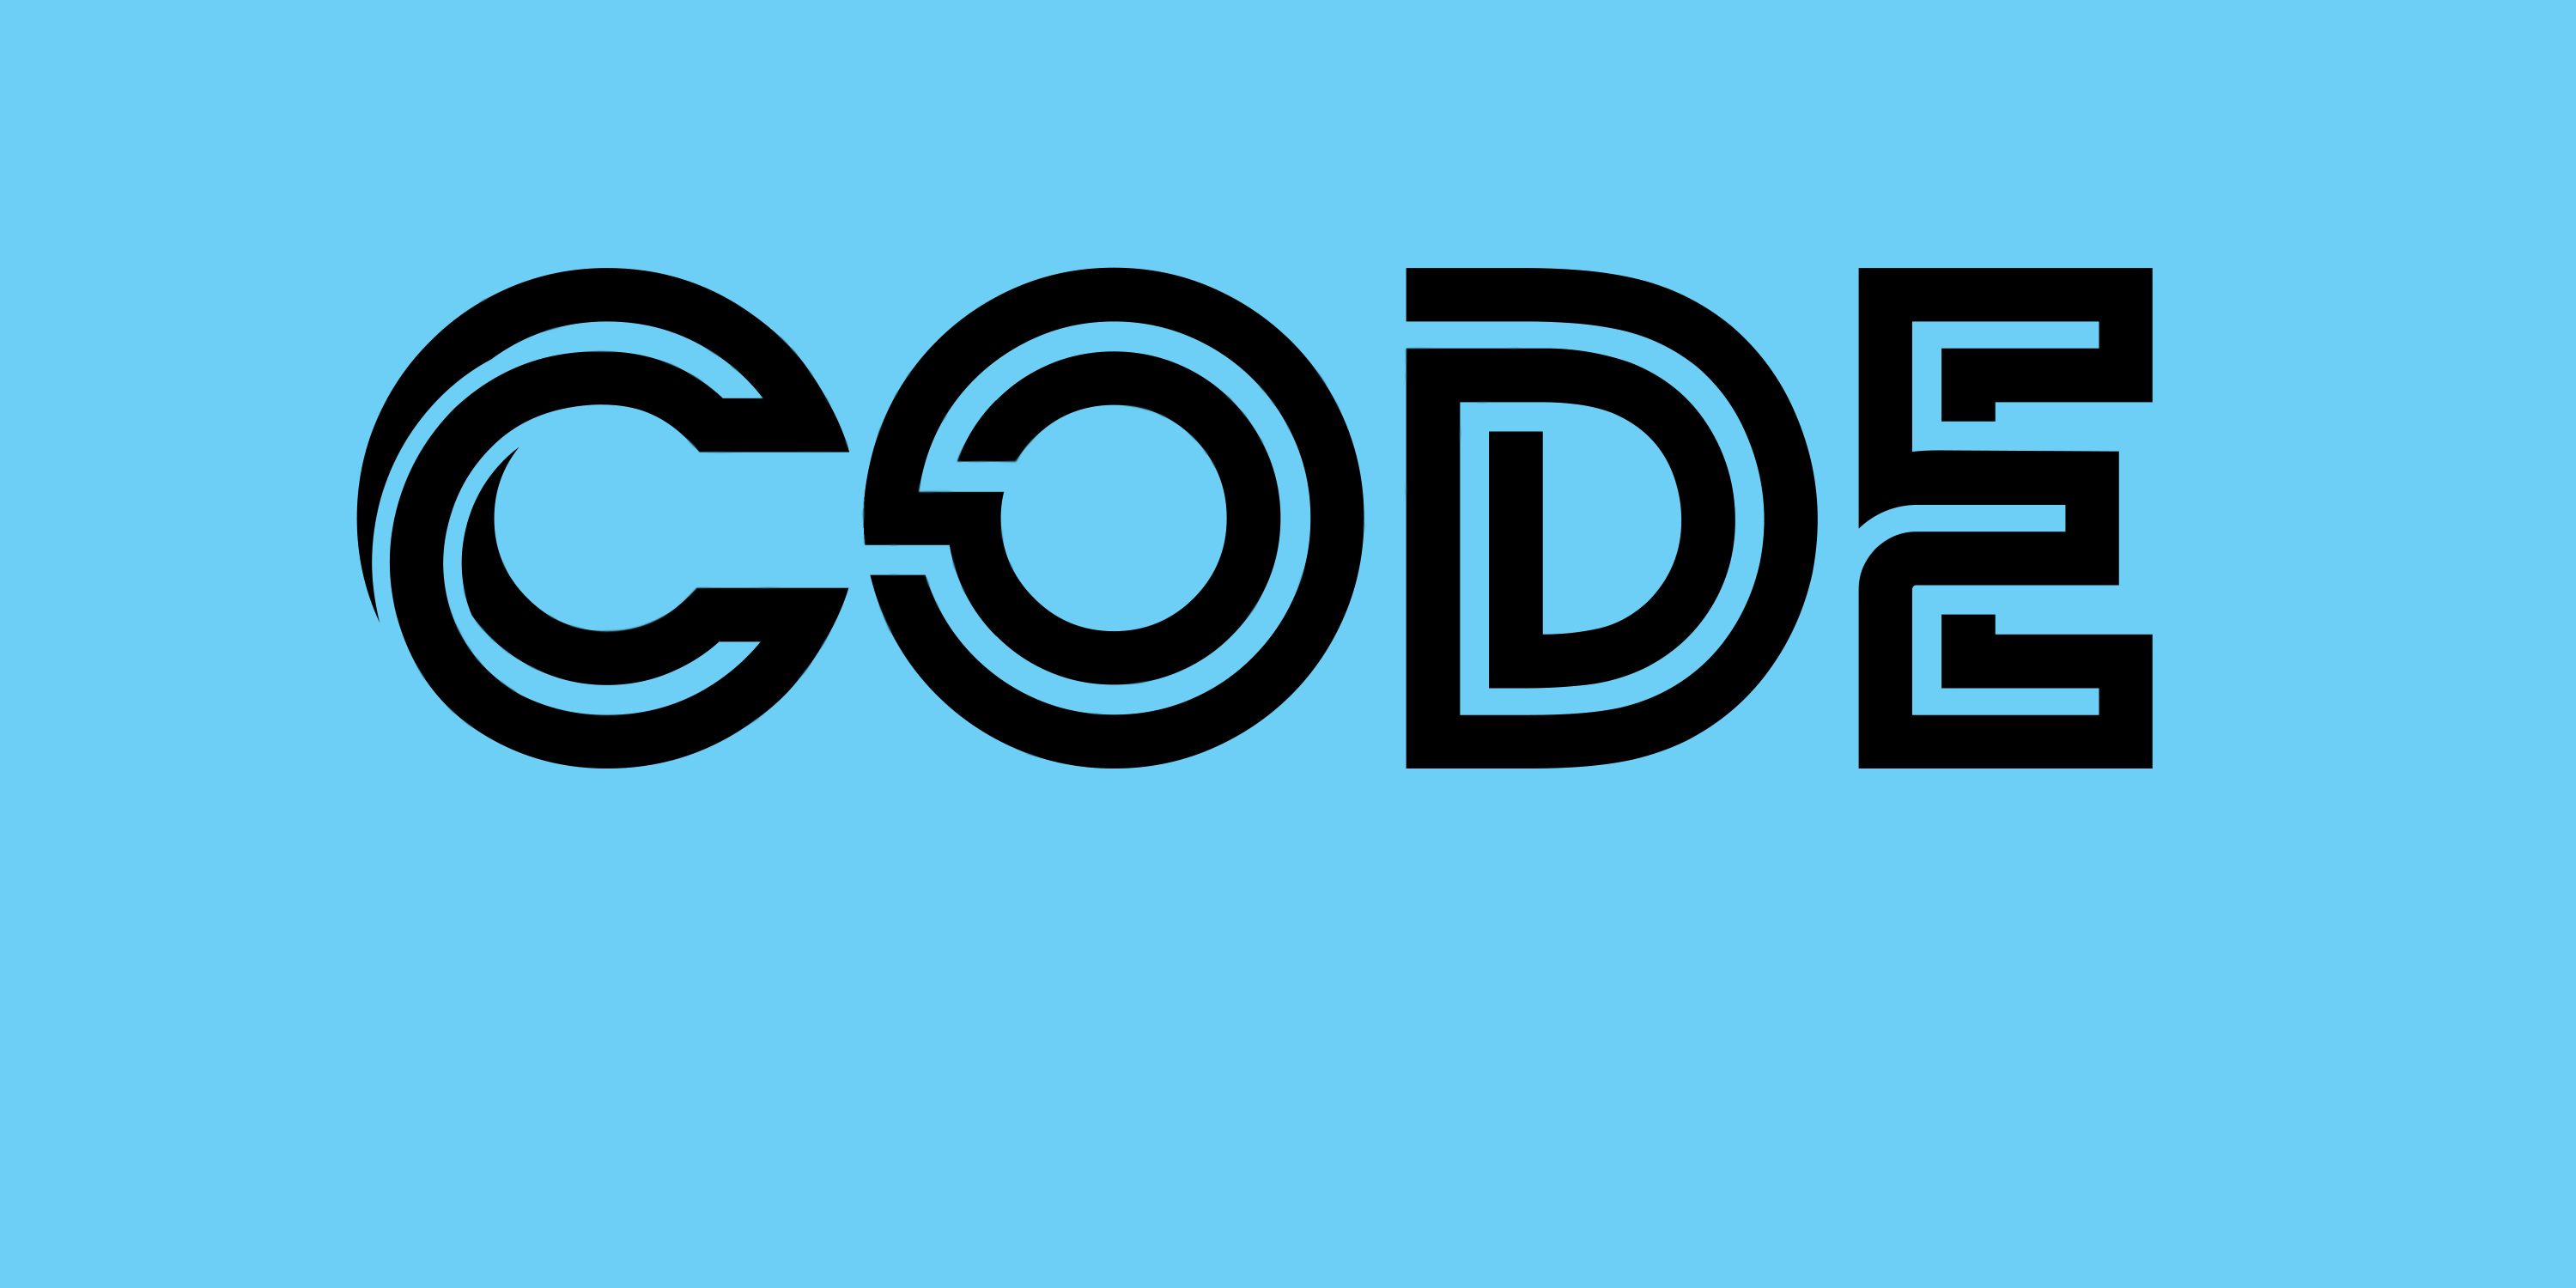 General 3000x1500 code Code clan typography simple background cyan background cyan